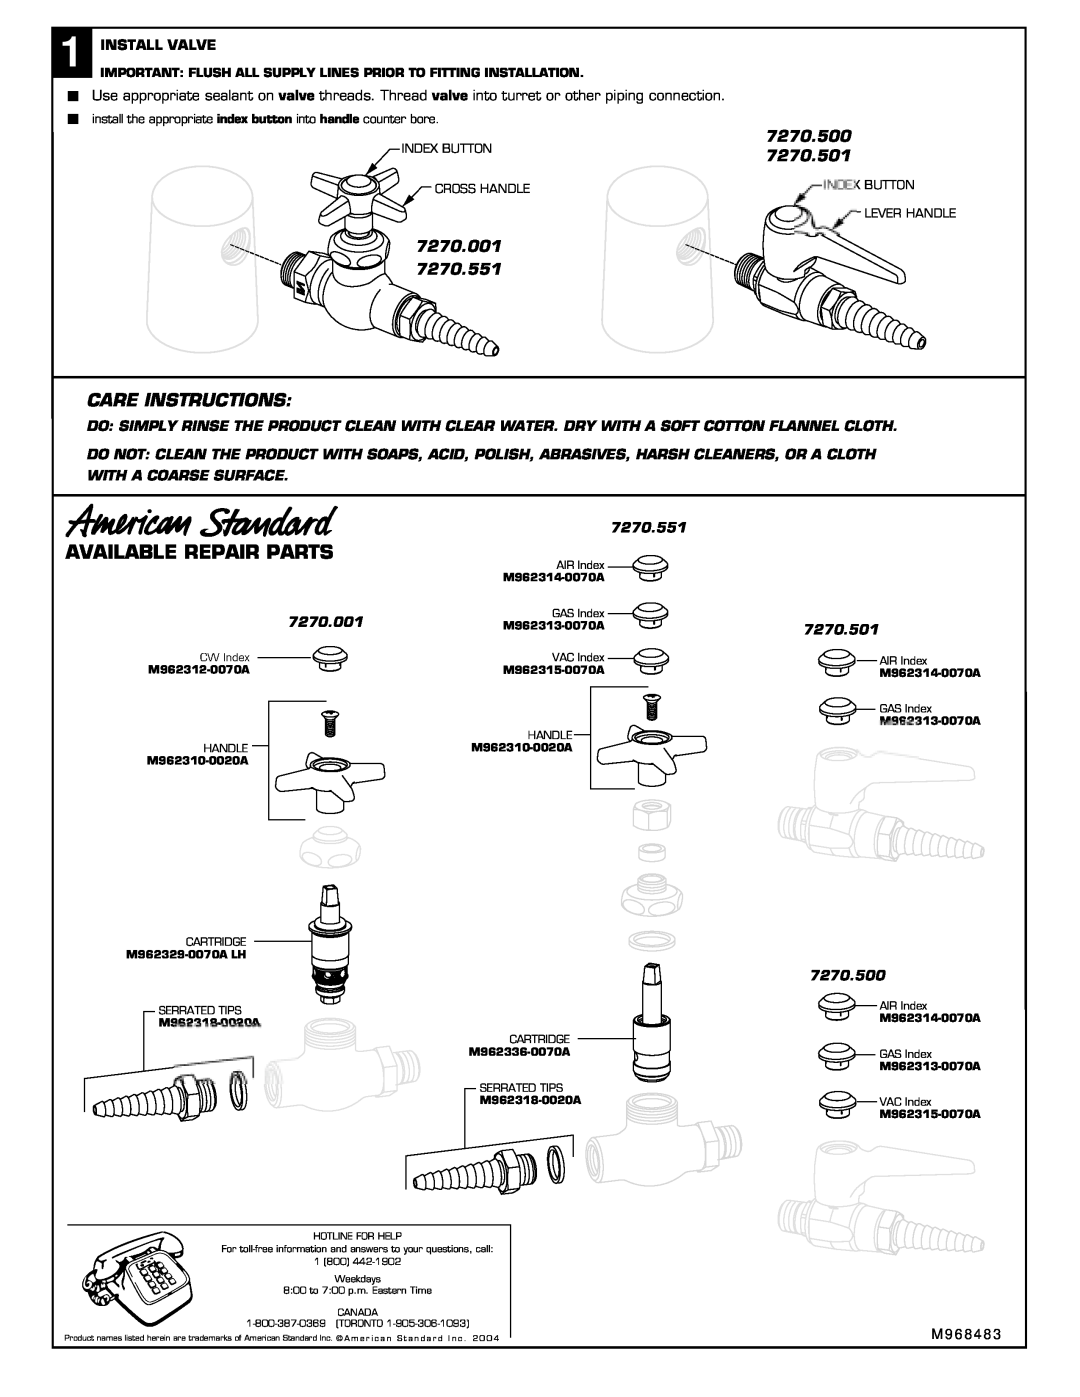 American Standard 7270.500 7270.001, Available Repair Parts, Care Instructions, 7270.501, Install Valve, 7270.551, M 